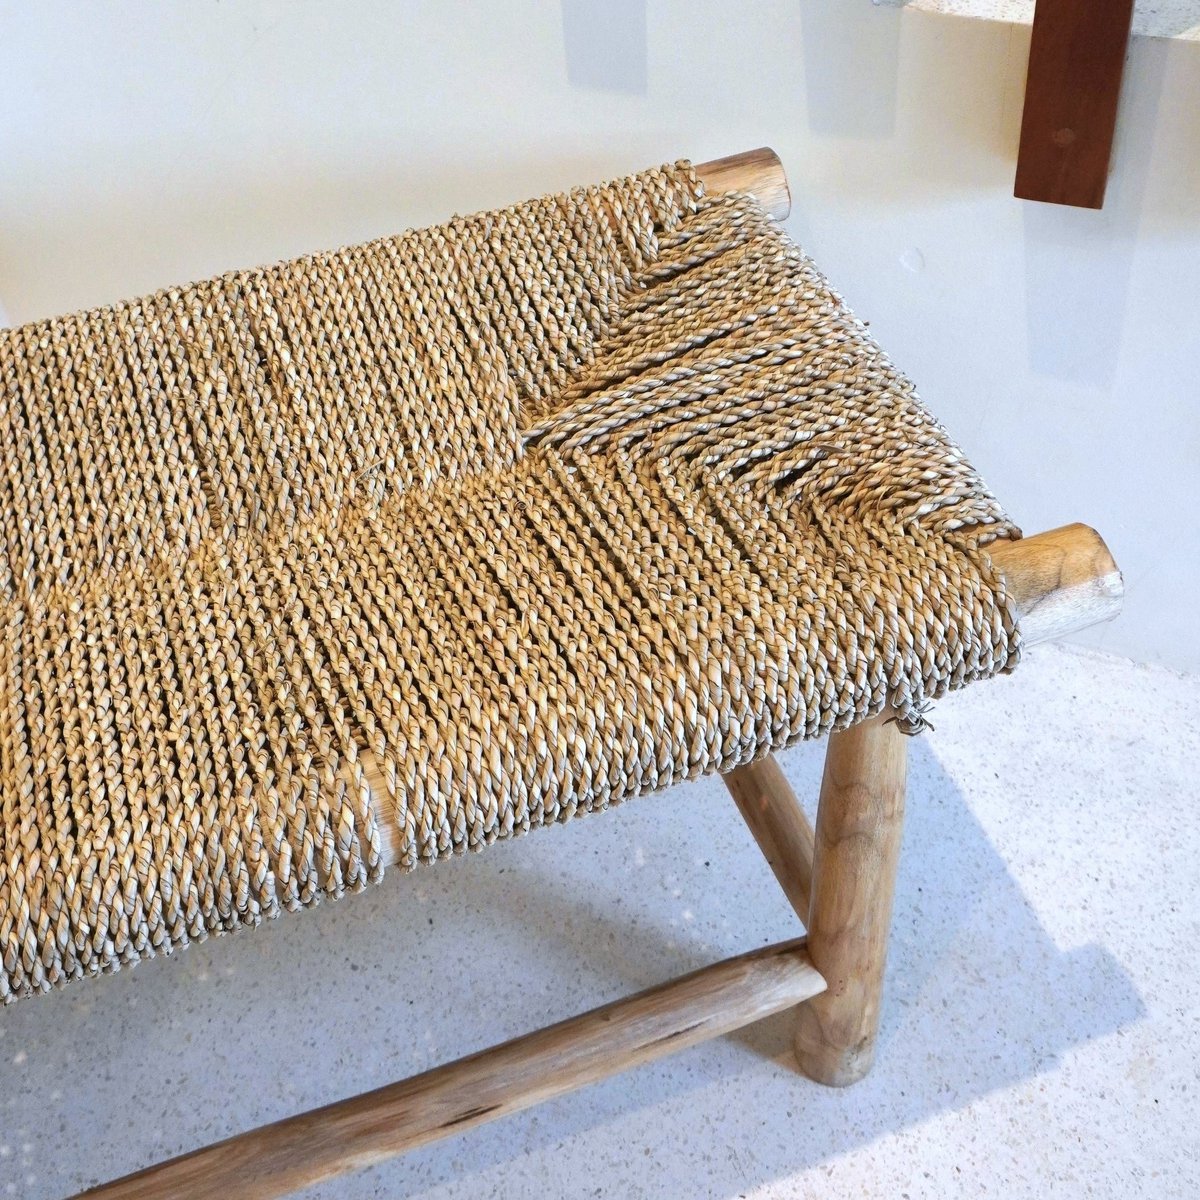 SUNGAI sofa made of solid wood with a seat made of woven seagrass